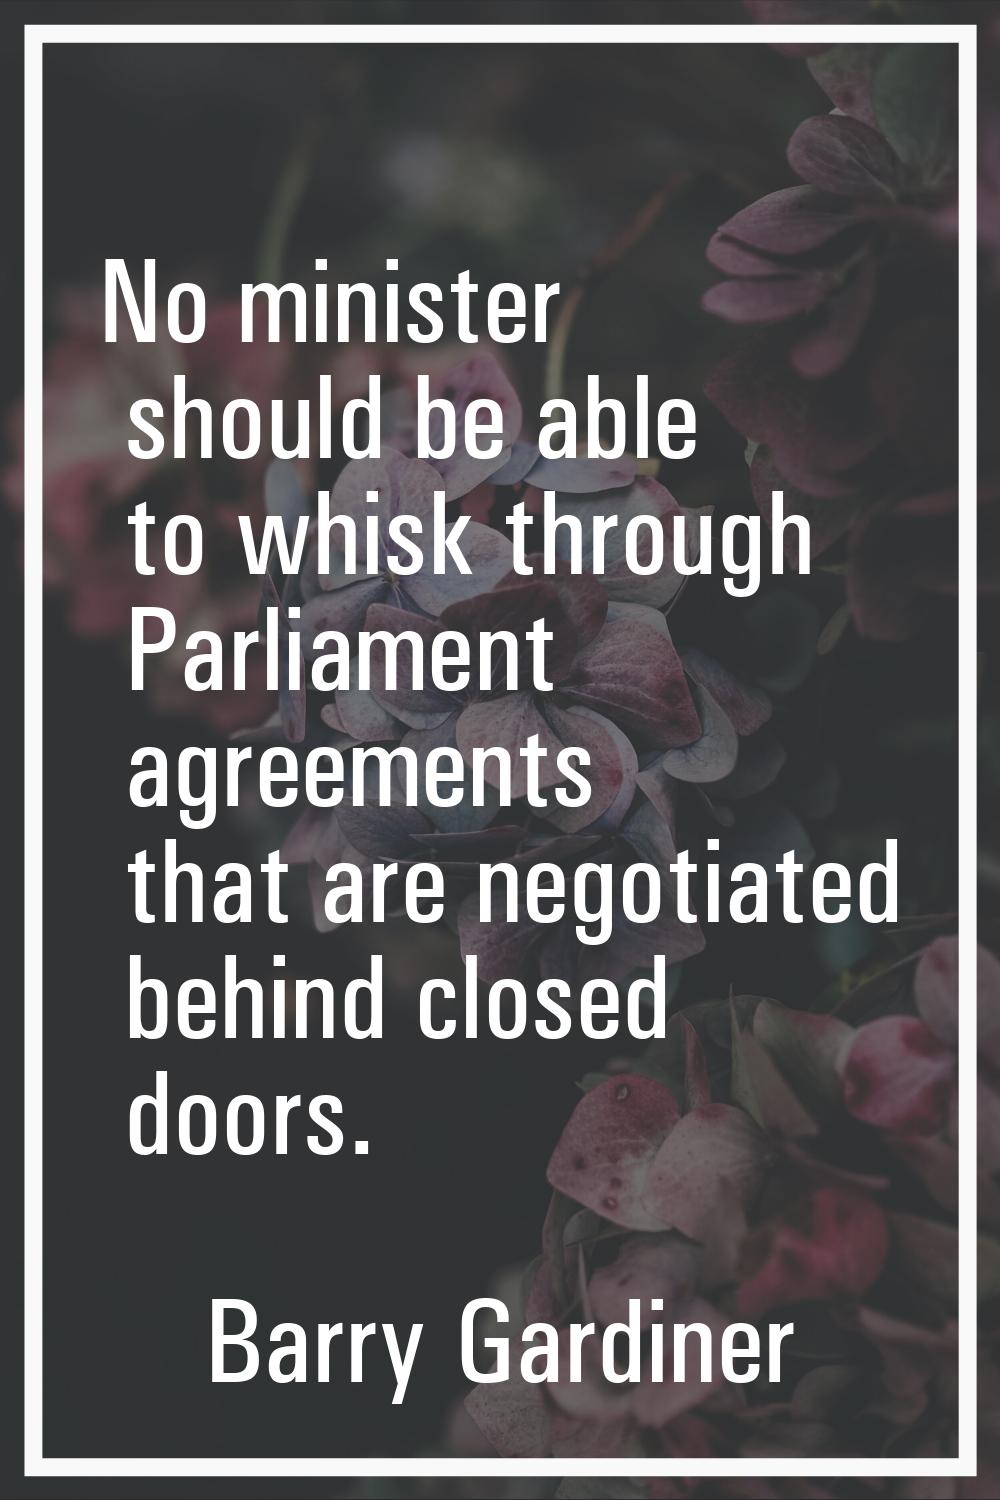 No minister should be able to whisk through Parliament agreements that are negotiated behind closed